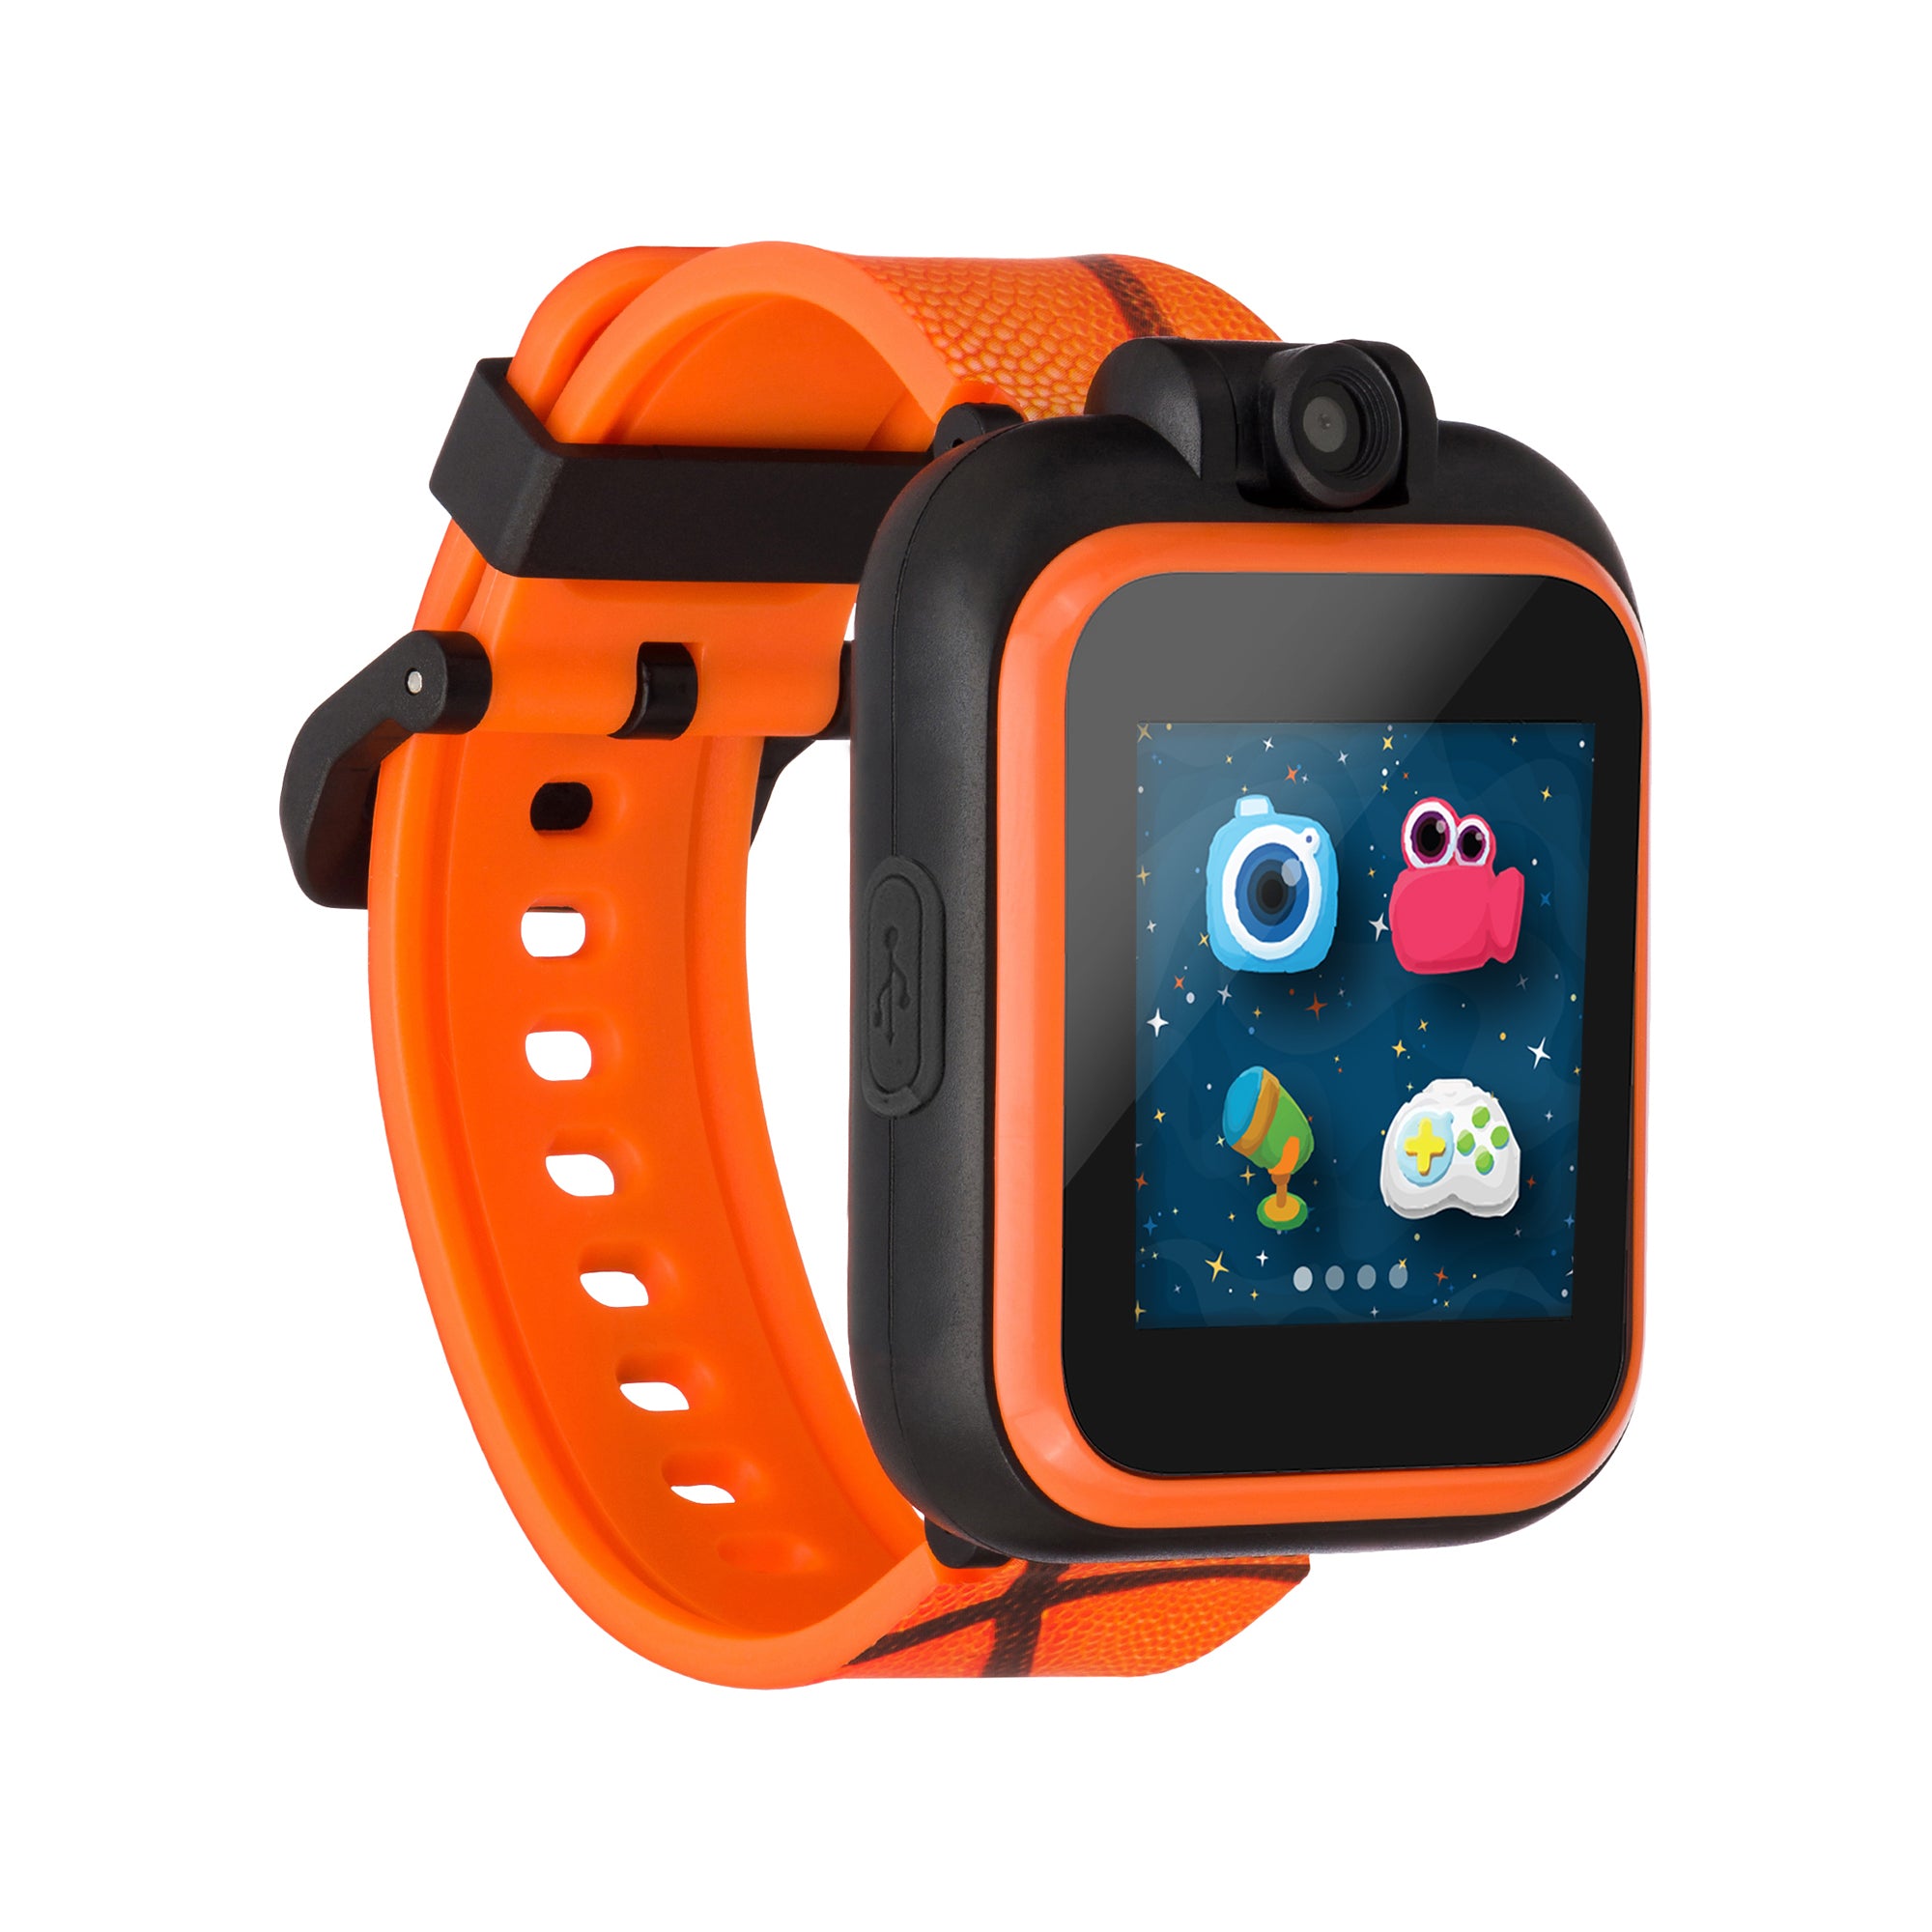 PlayZoom Smartwatch for Kids: Basketball Print affordable smart watch